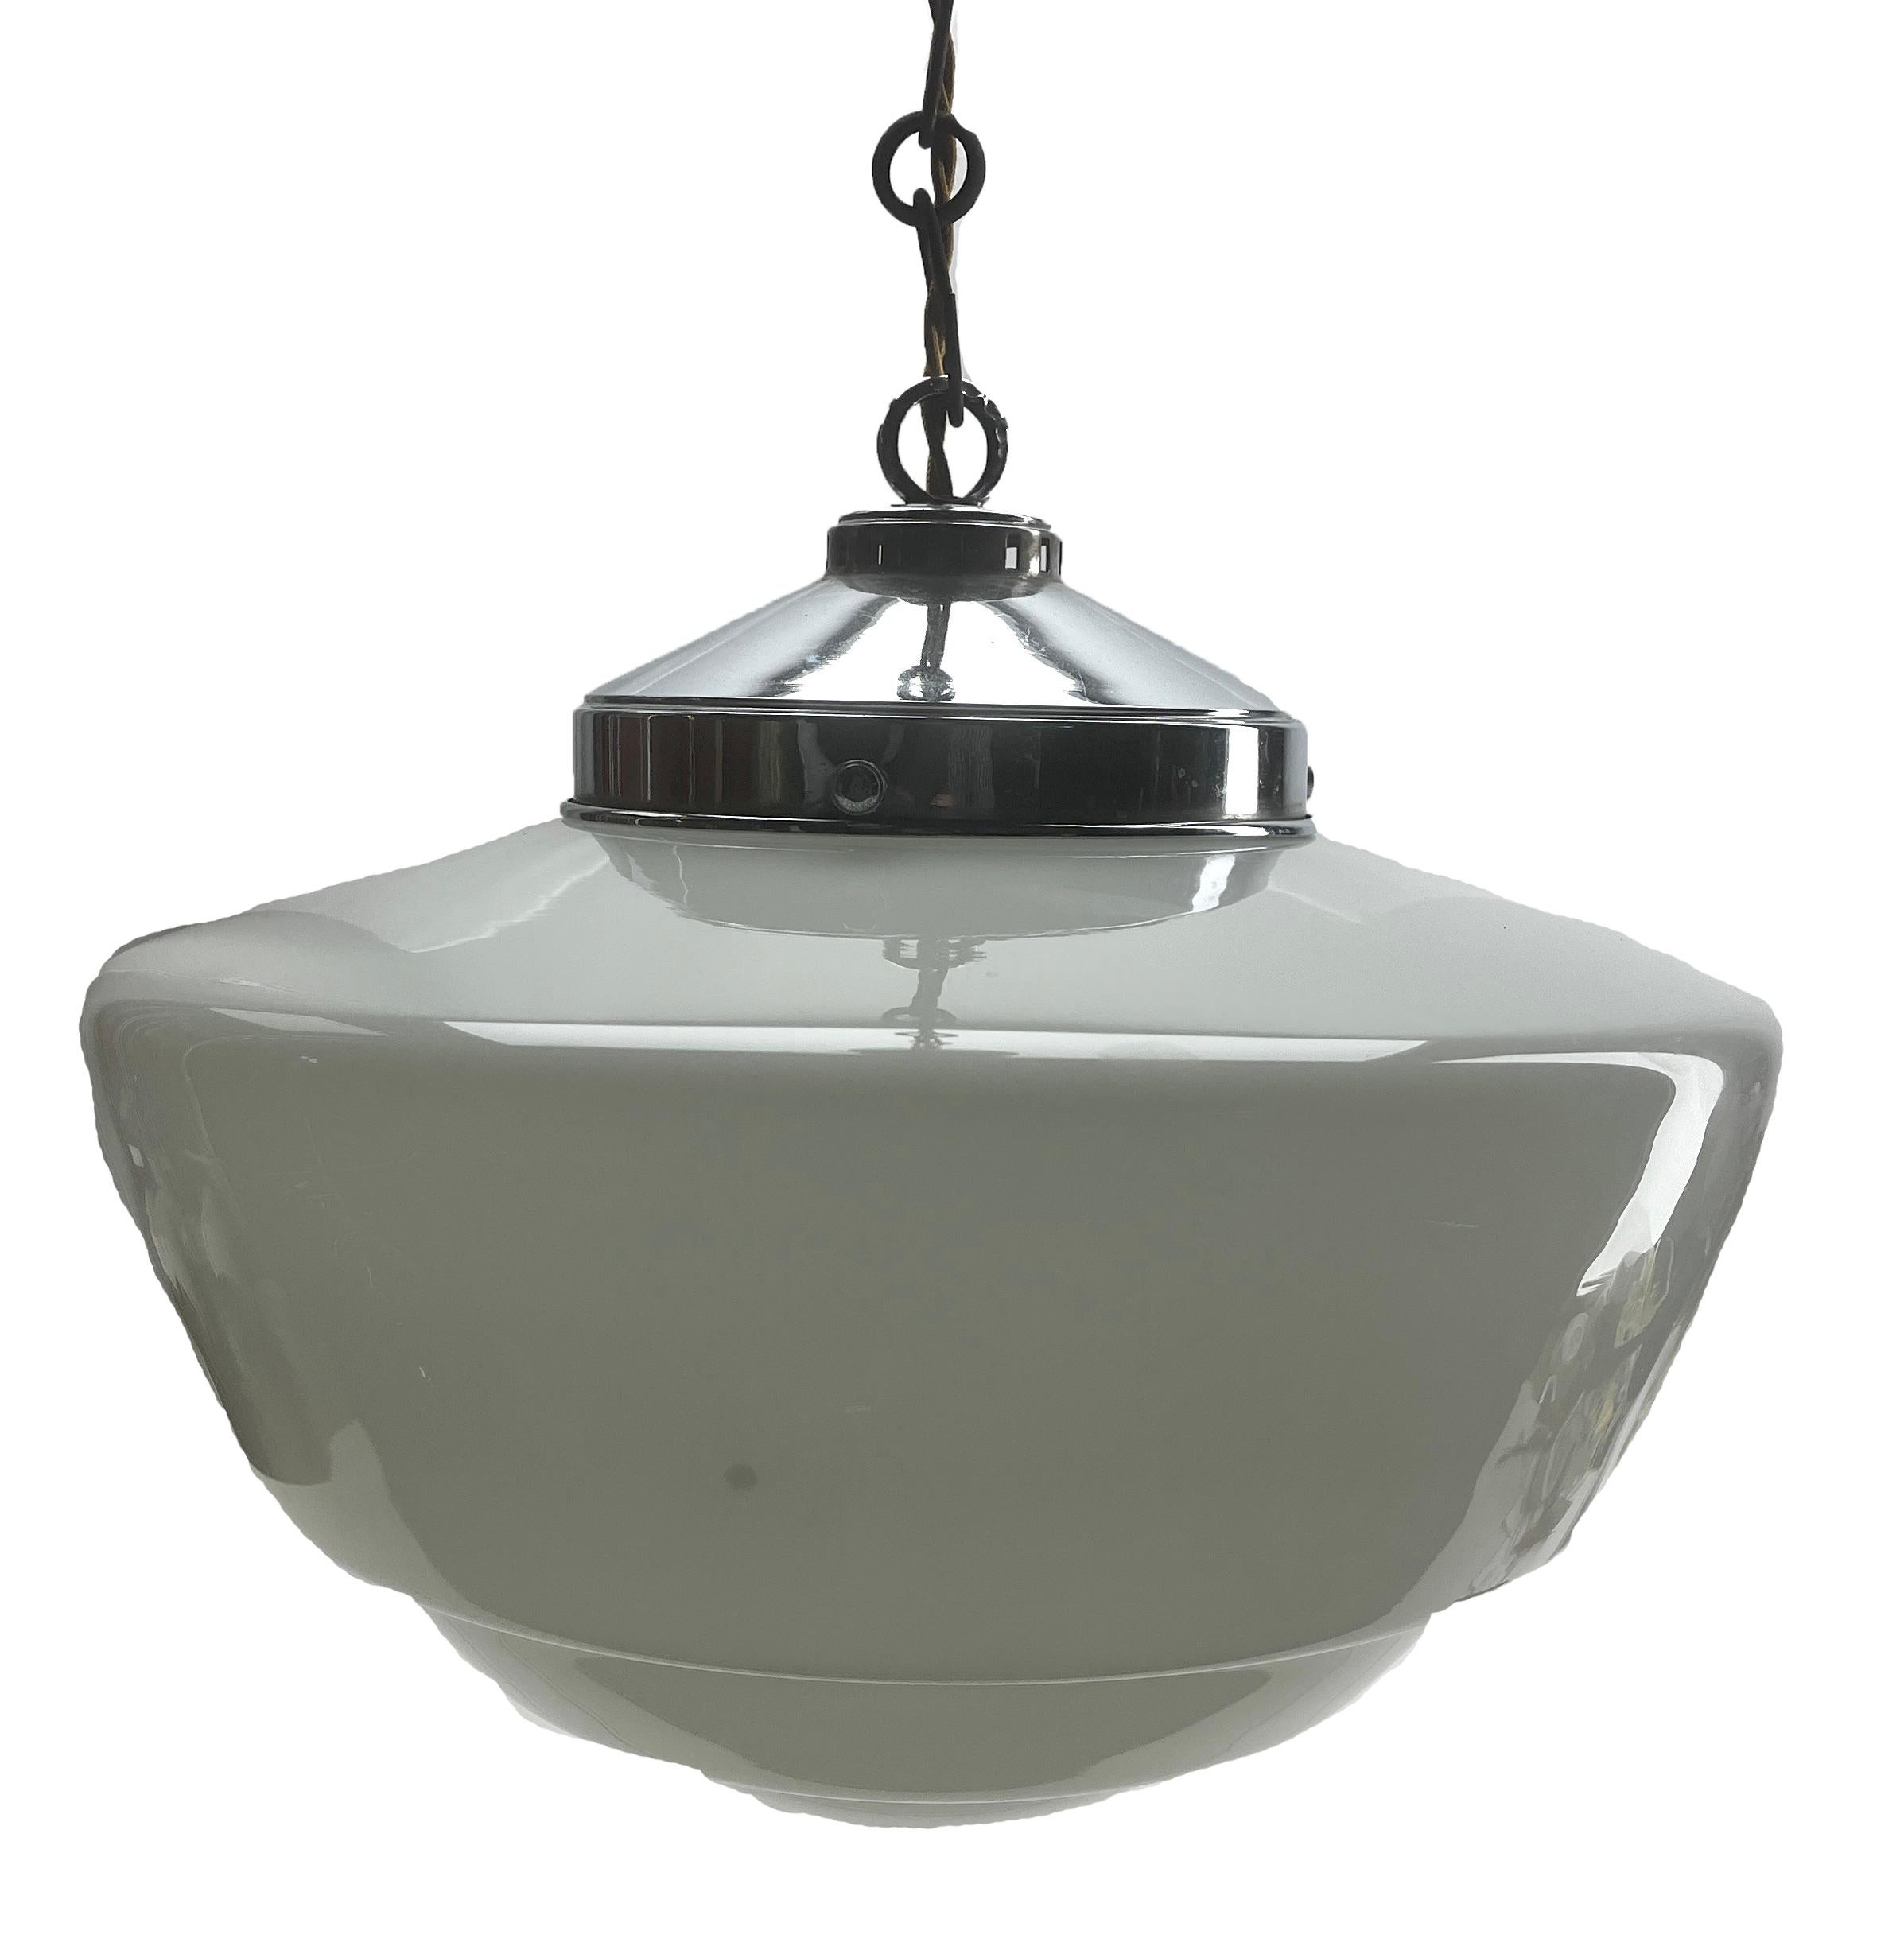 Dutch Phillips Pendant Lamp with a Opaline Shade and Chrome Fittings, 1930s, Holland For Sale